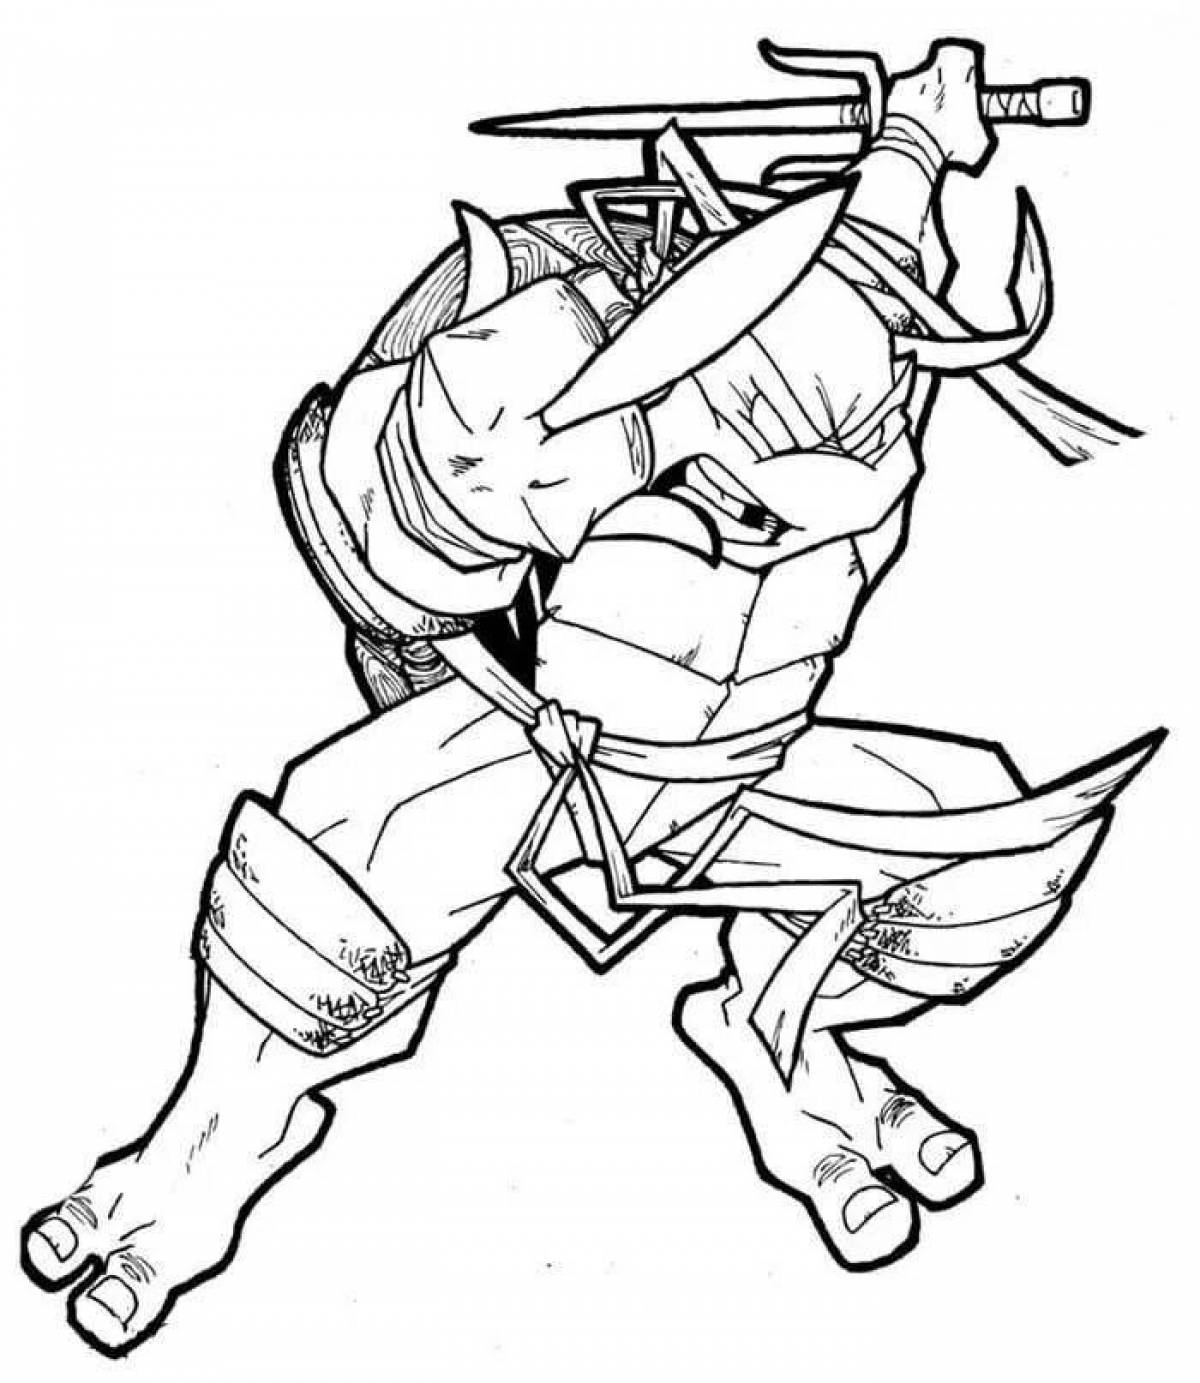 Brawlers exciting coloring pages